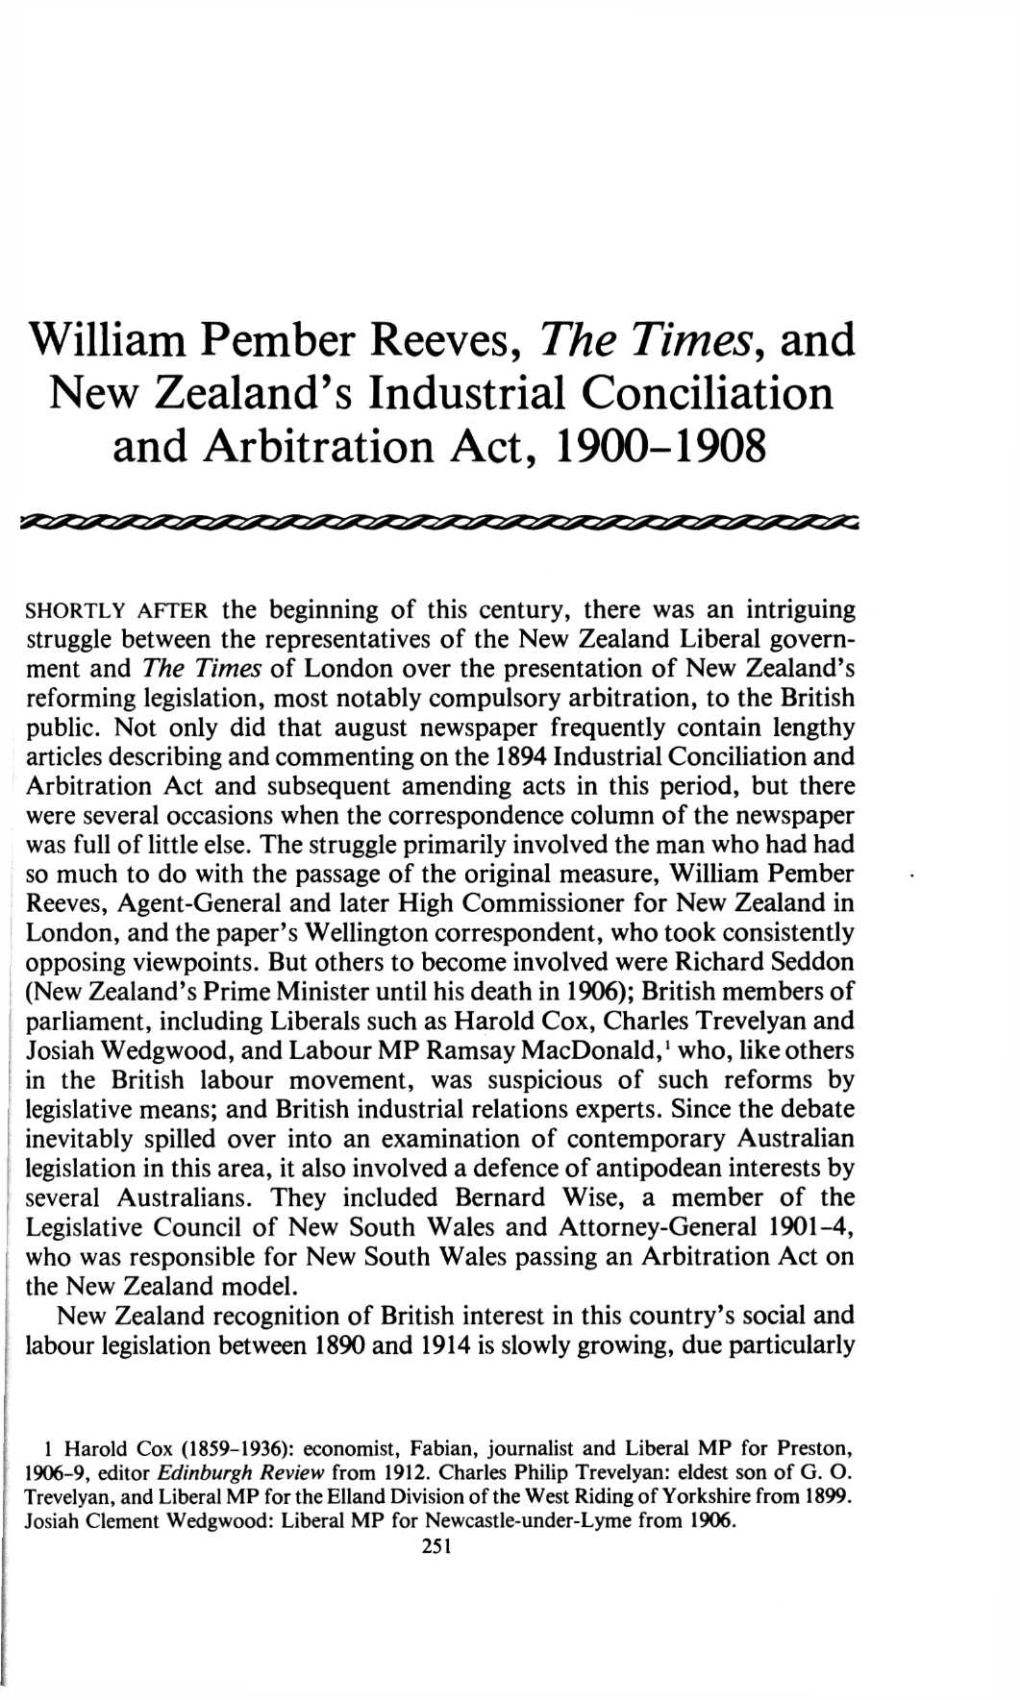 William Pember Reeves, the Times, and New Zealand's Industrial Conciliation and Arbitration Act, 1900-1908